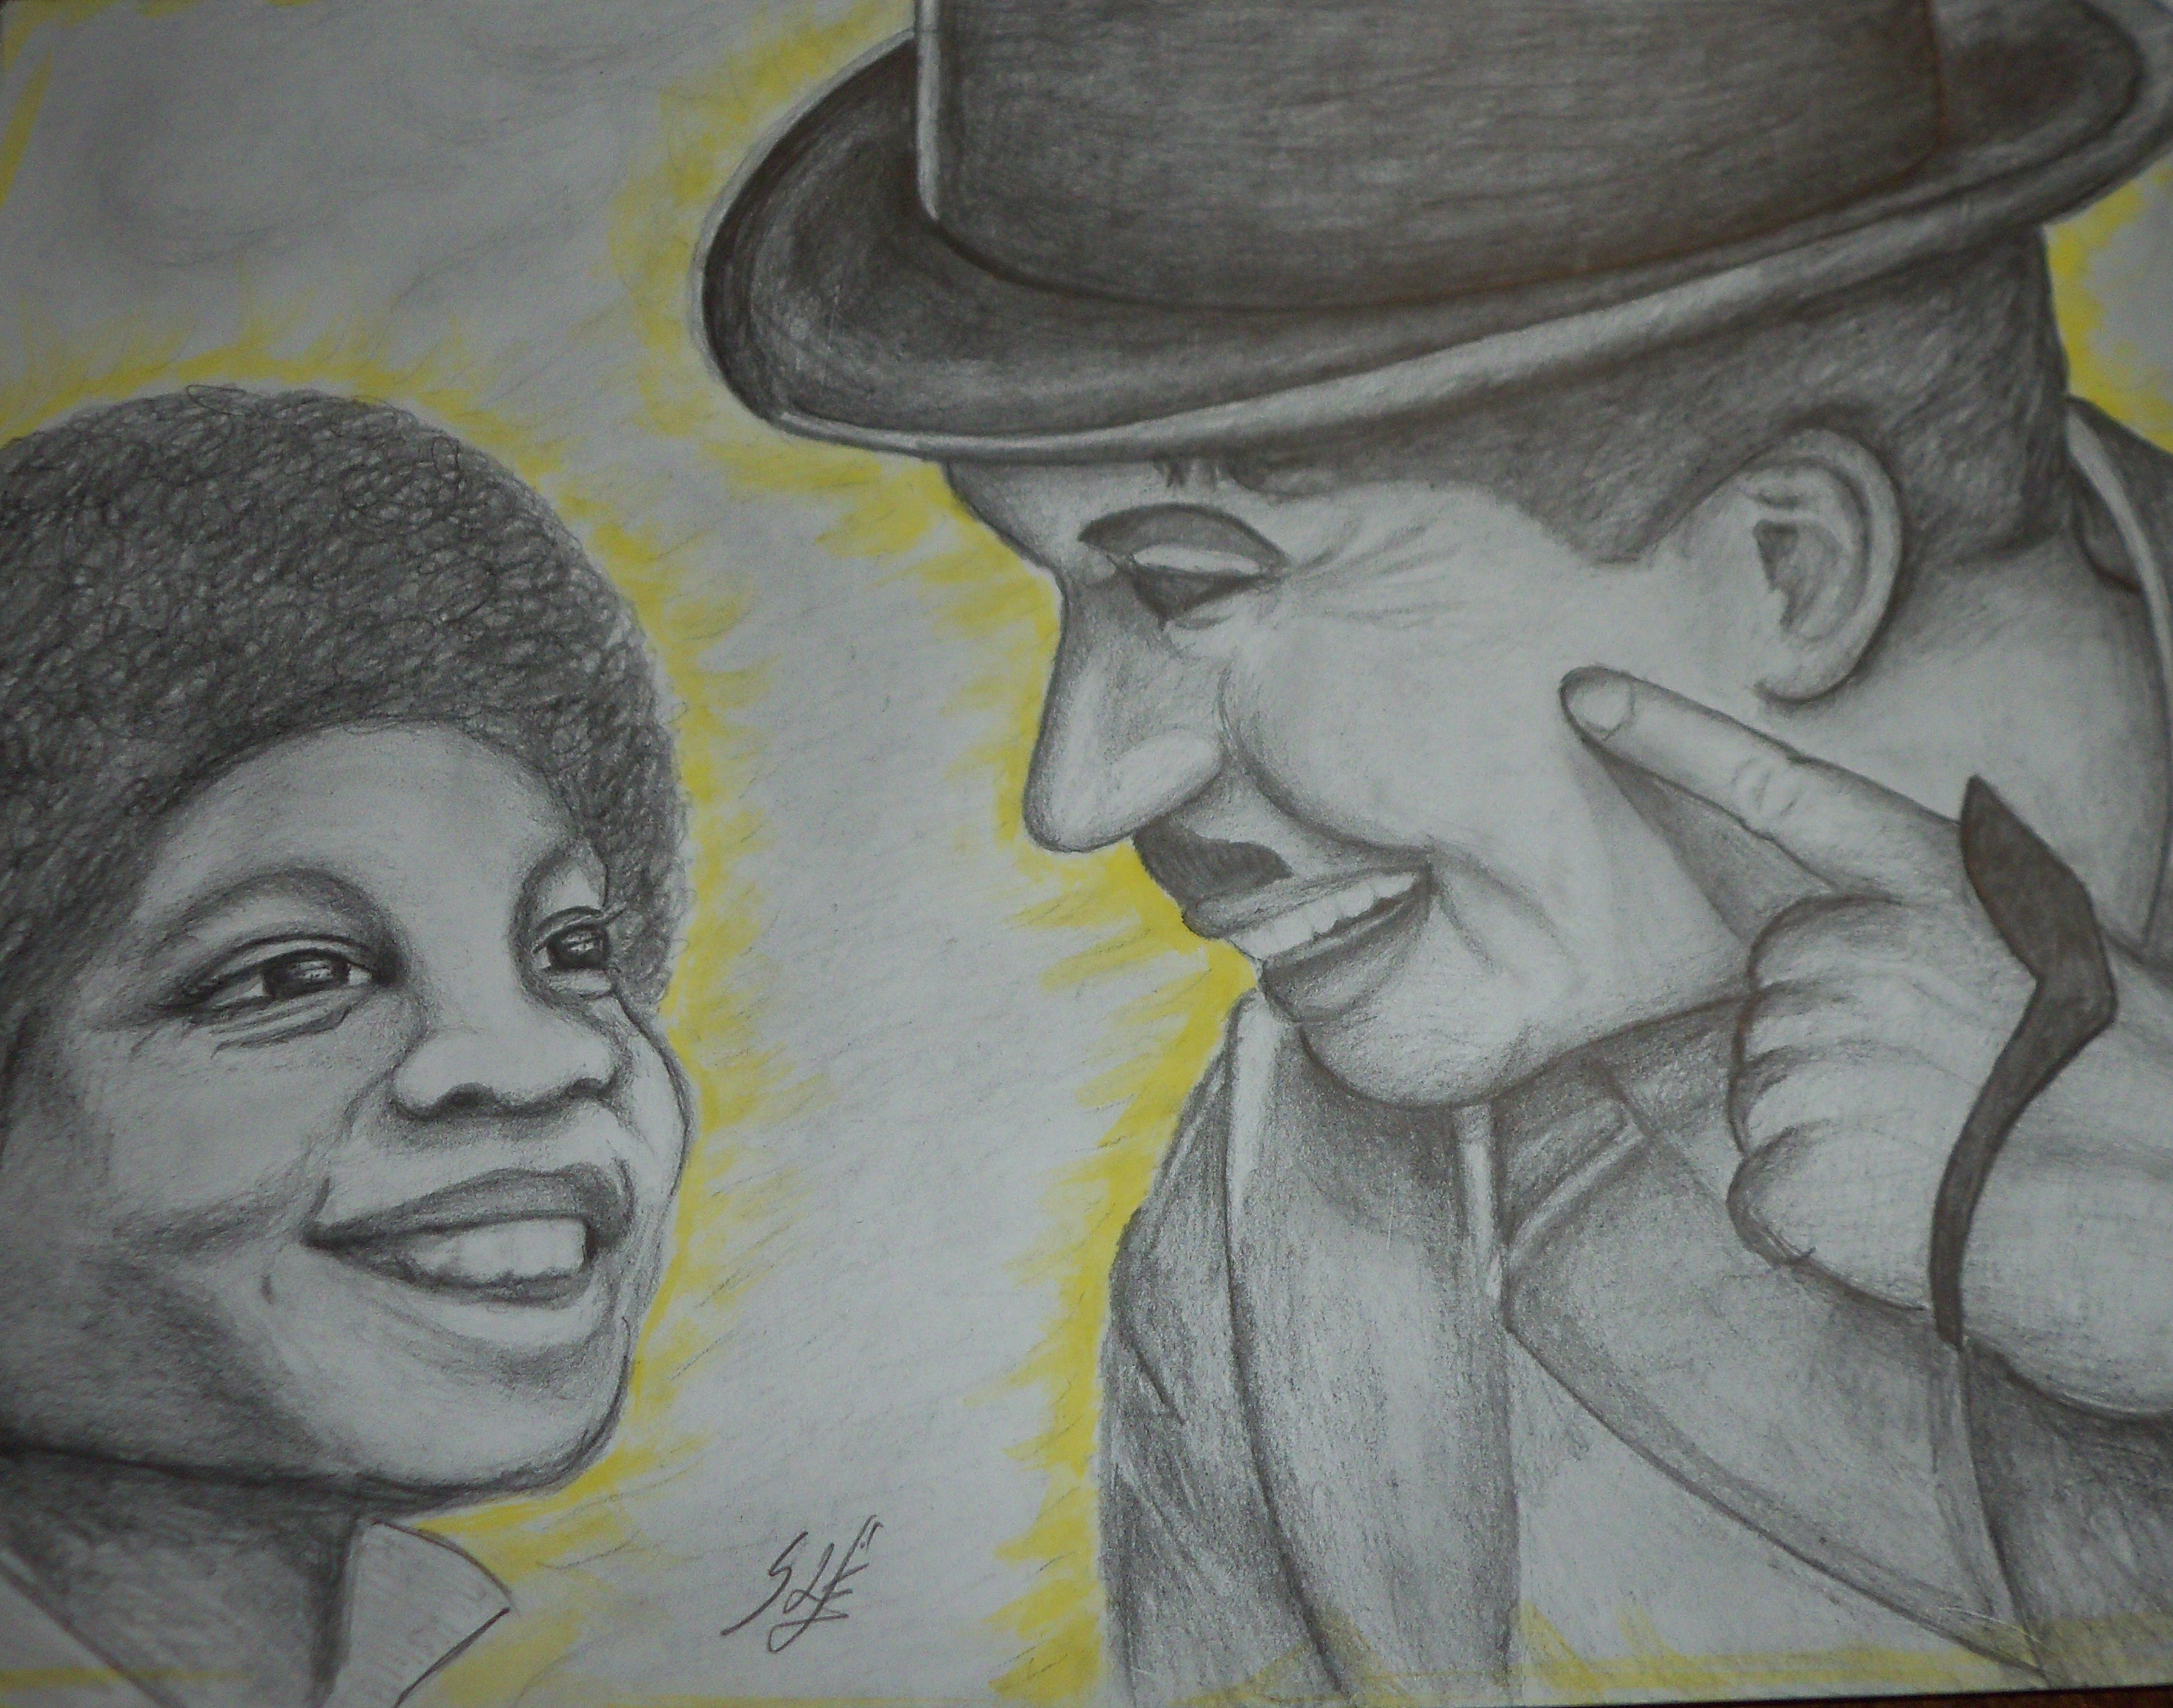 Smile – Little Michael and Charlie Chaplin